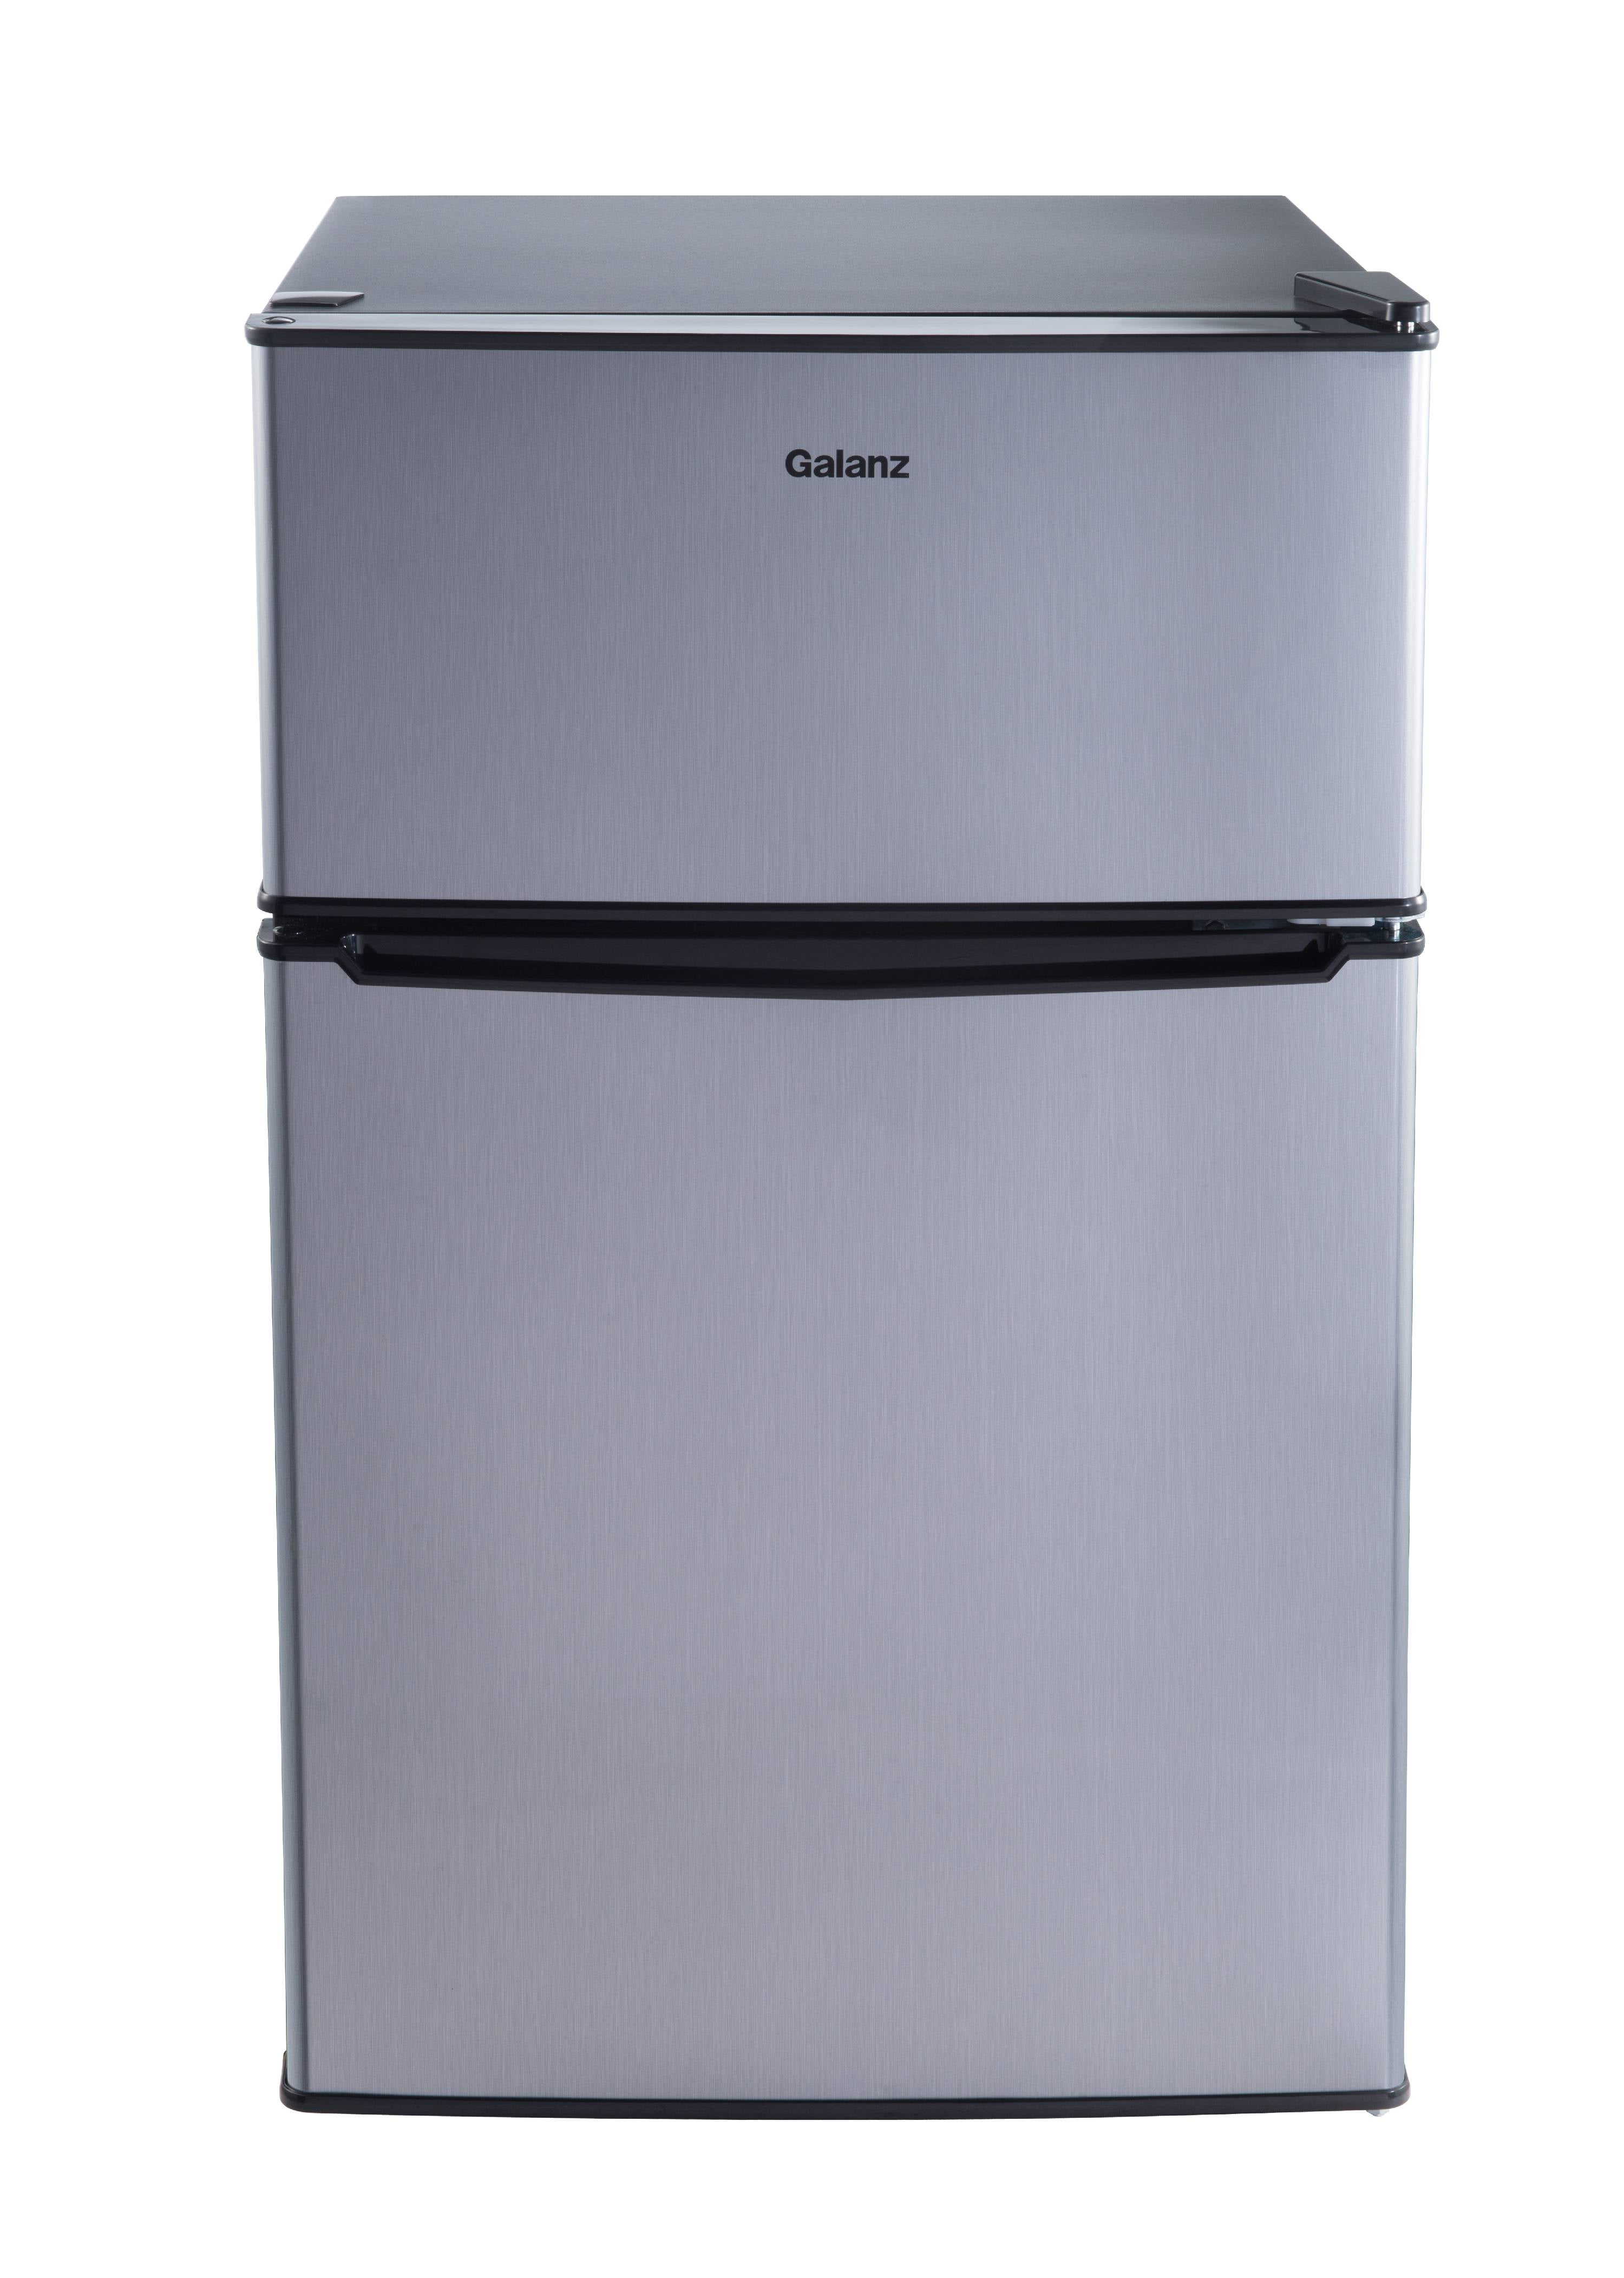 Galanz 3.1 Cu Ft Two Door Mini Fridge with Freezer GL31S5, Stainless